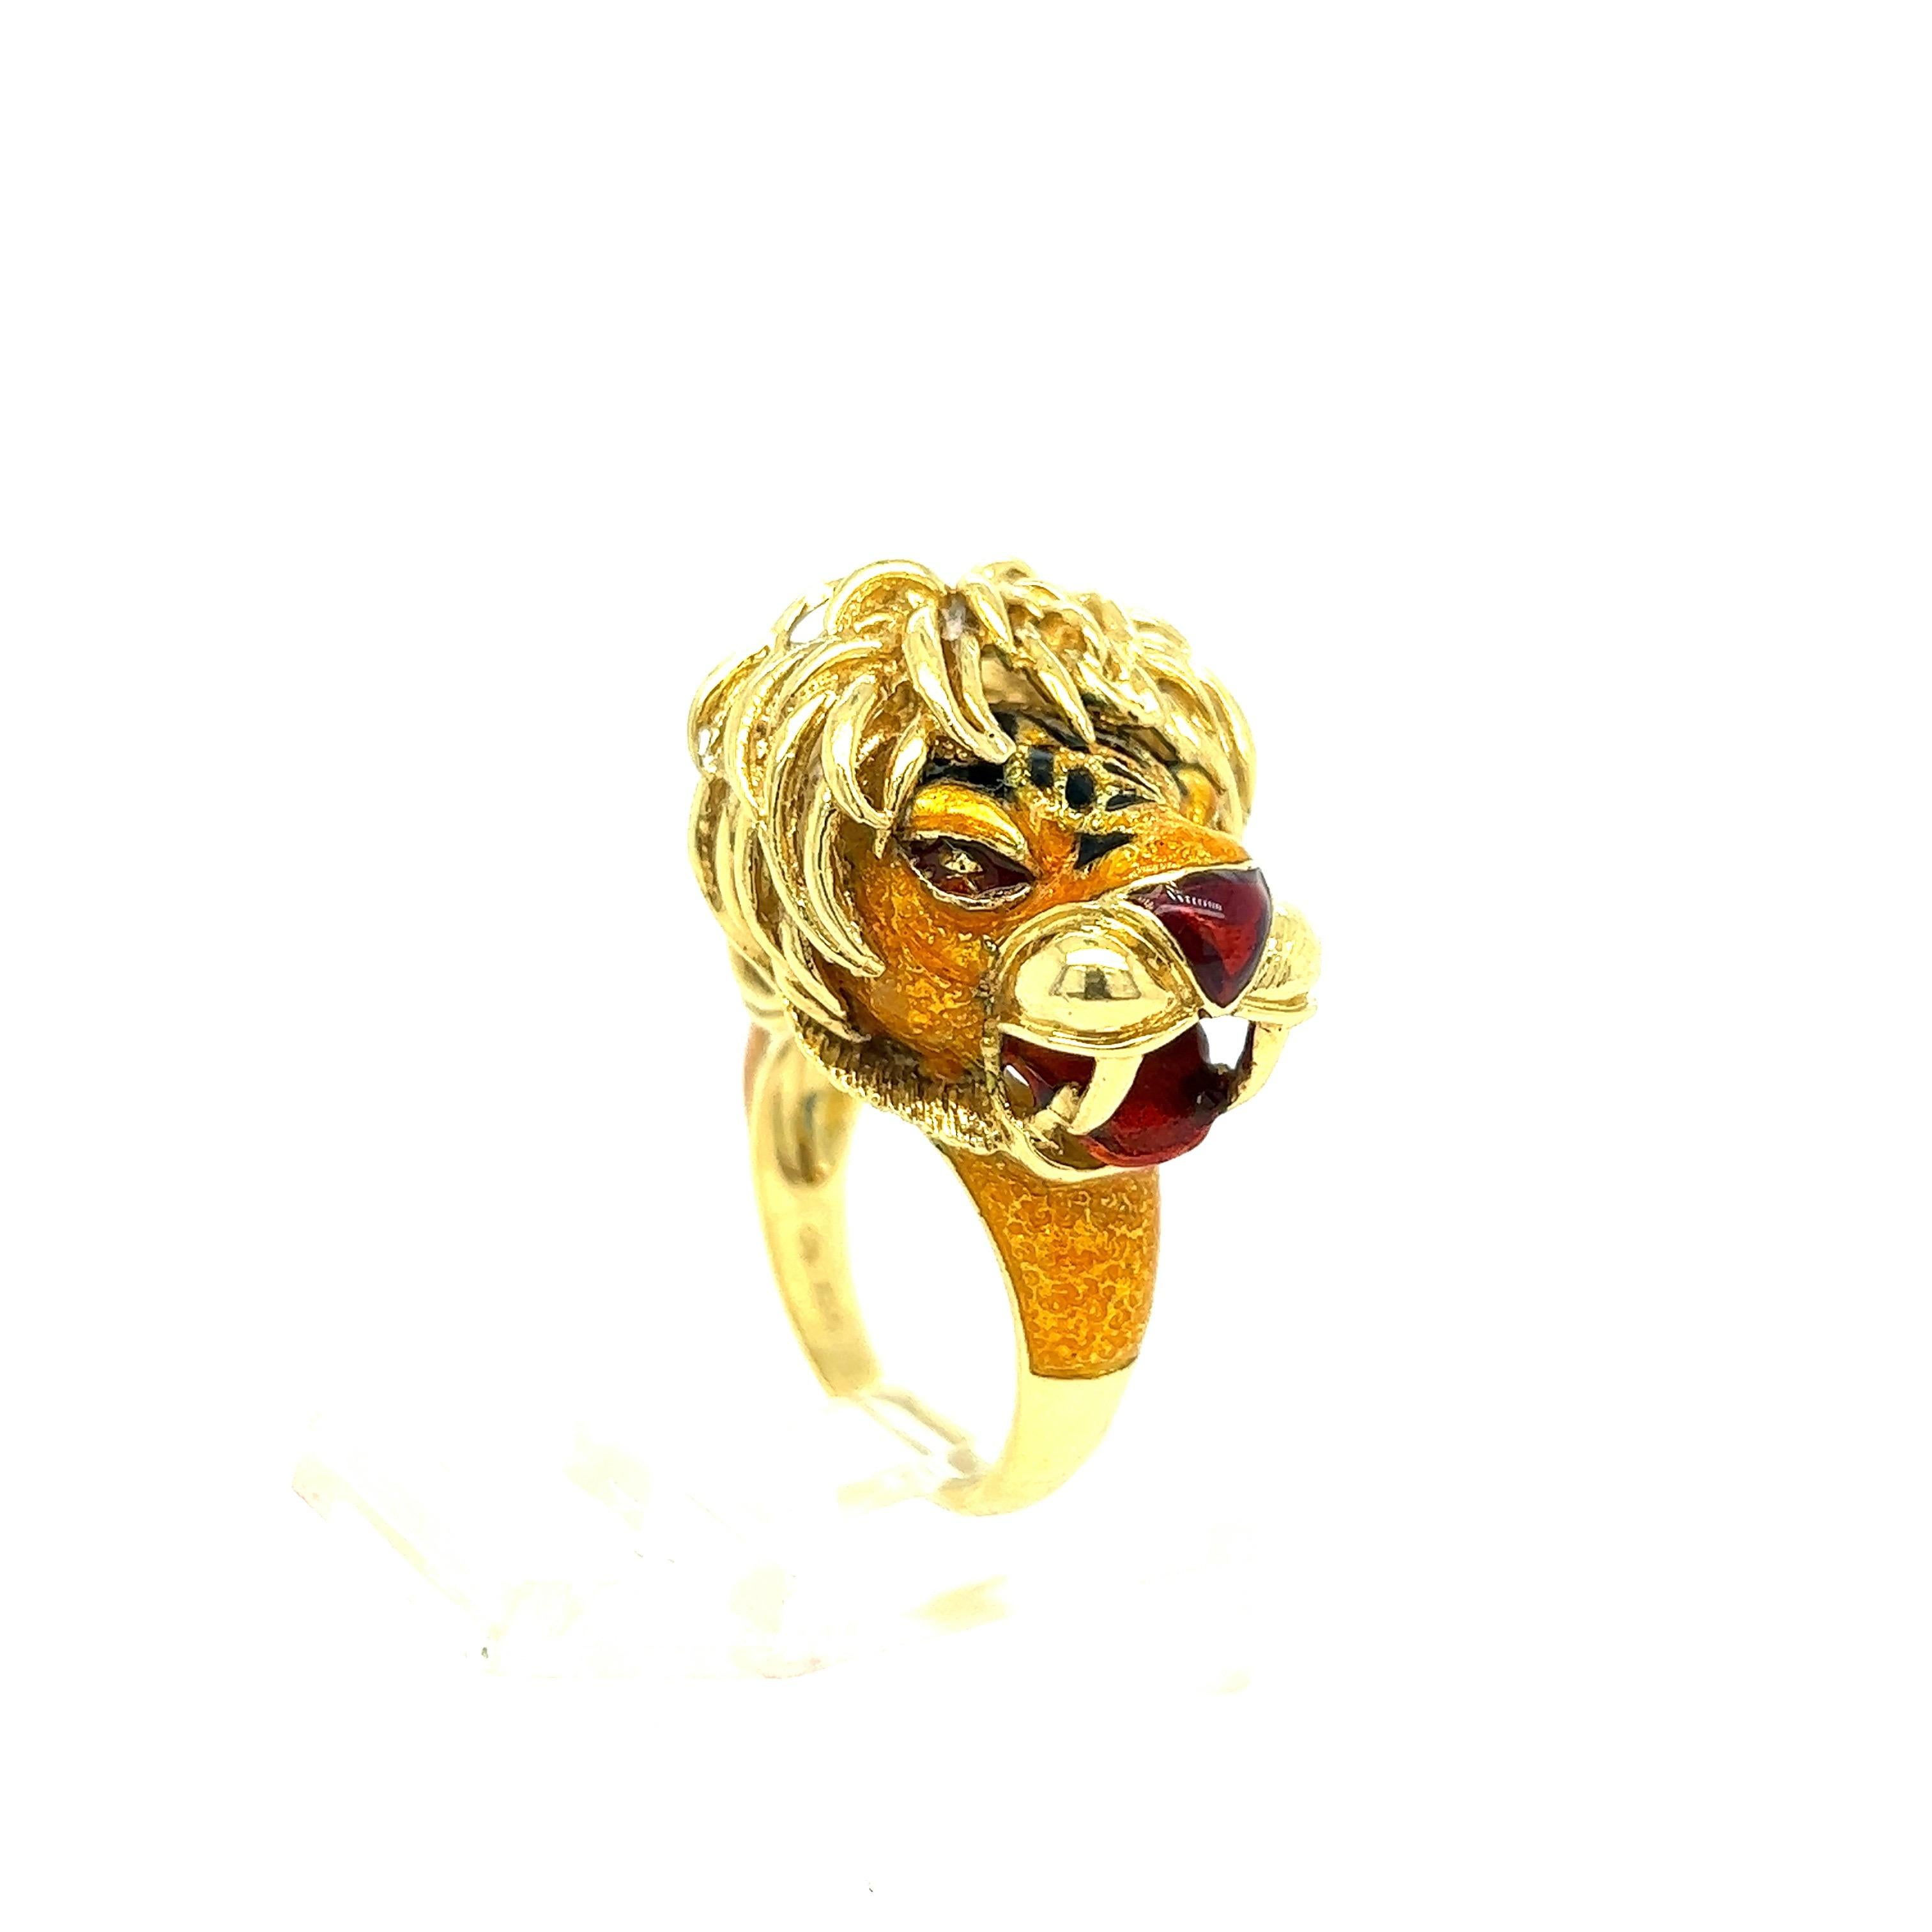 18k yellow gold lion head ring, adorned with multi color enamel. Ring size 7, top of the ring overall measures approx. 21mm x 25mm. Hallmarked 750 on the inside. Weight of the piece - 18.4 grams. 